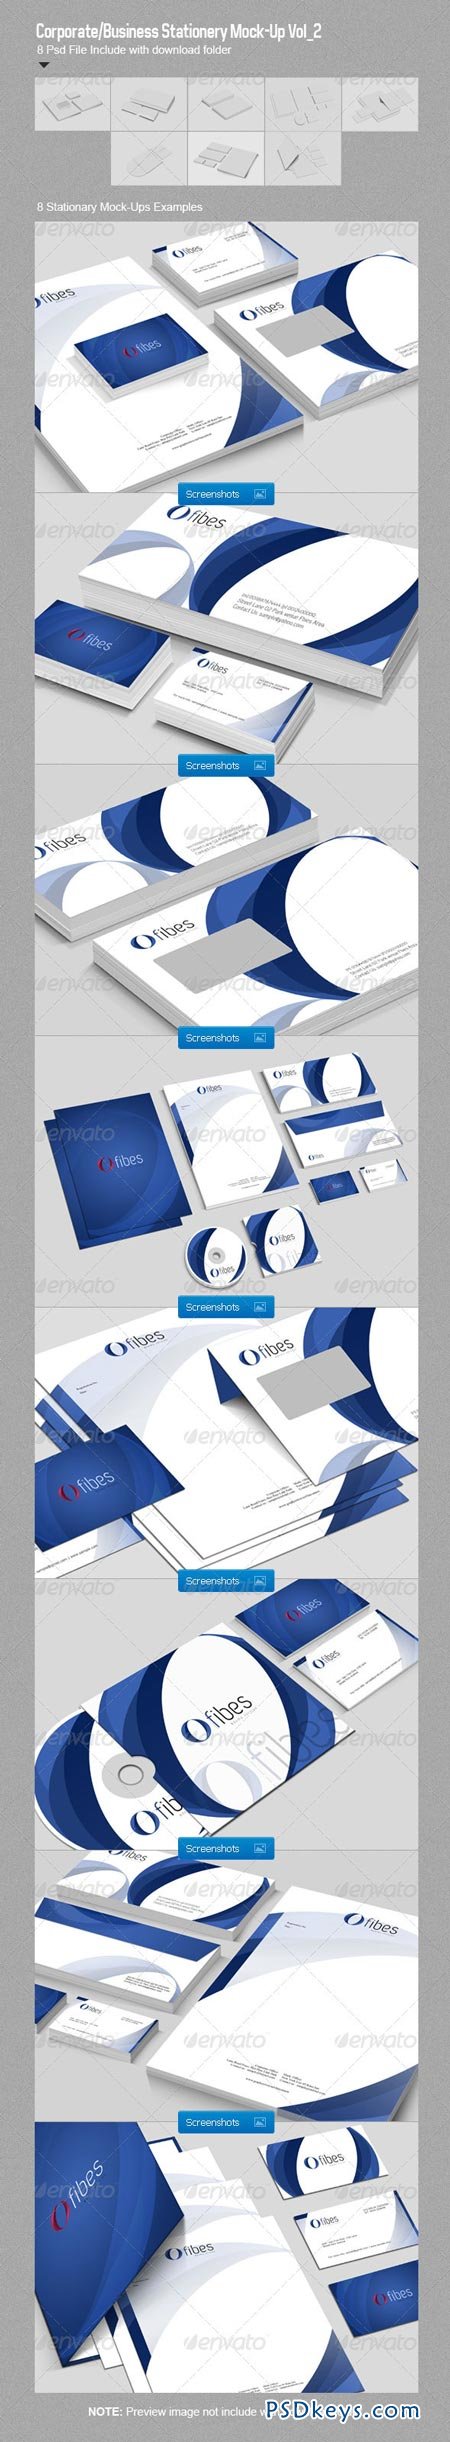 Corporate Business Stationery Mock-Up Vol_2 2688207